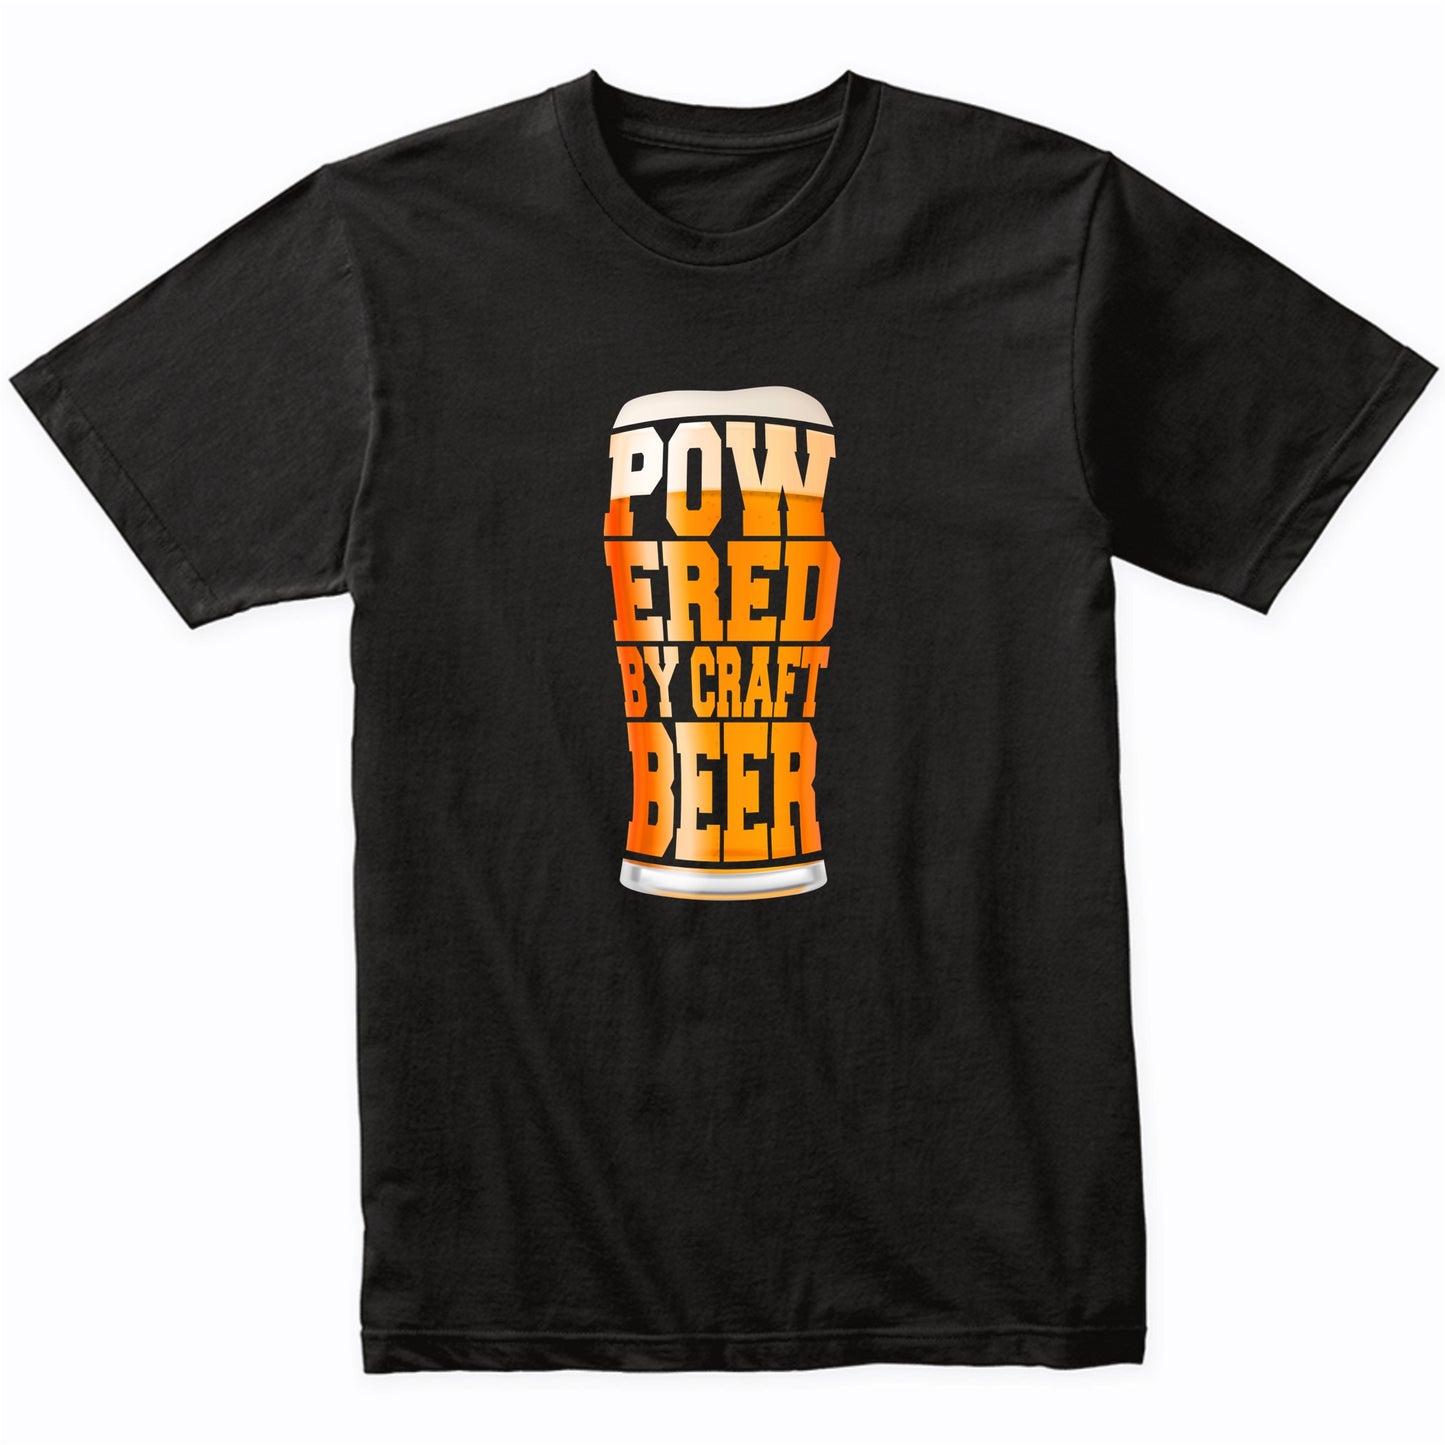 Powered By Craft Beer Funny Pint Glass T-Shirt